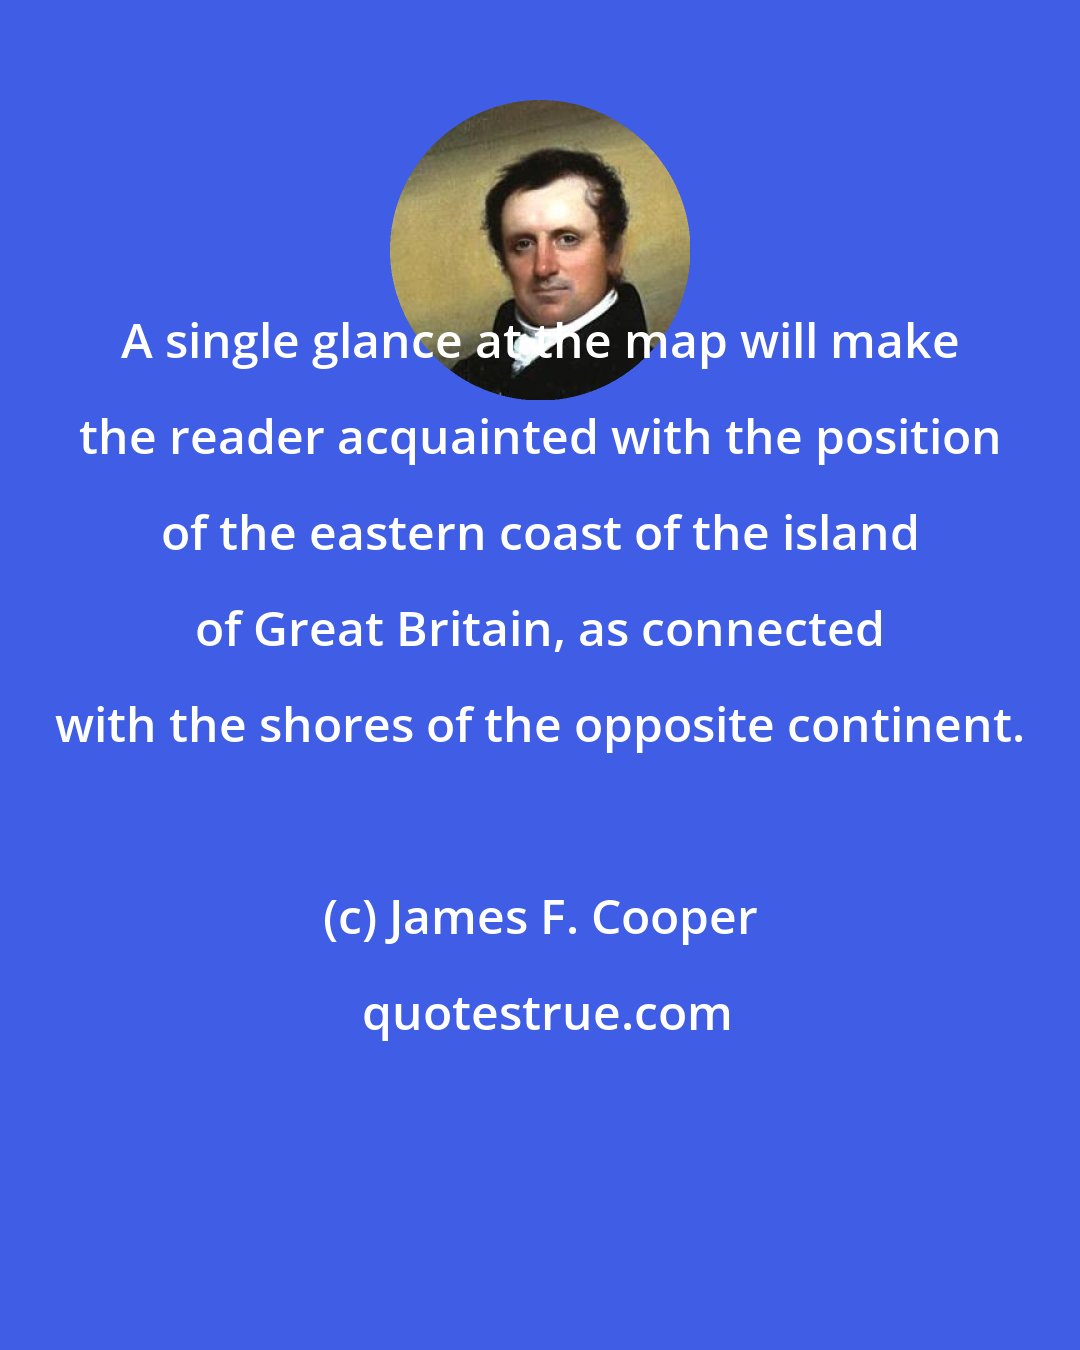 James F. Cooper: A single glance at the map will make the reader acquainted with the position of the eastern coast of the island of Great Britain, as connected with the shores of the opposite continent.